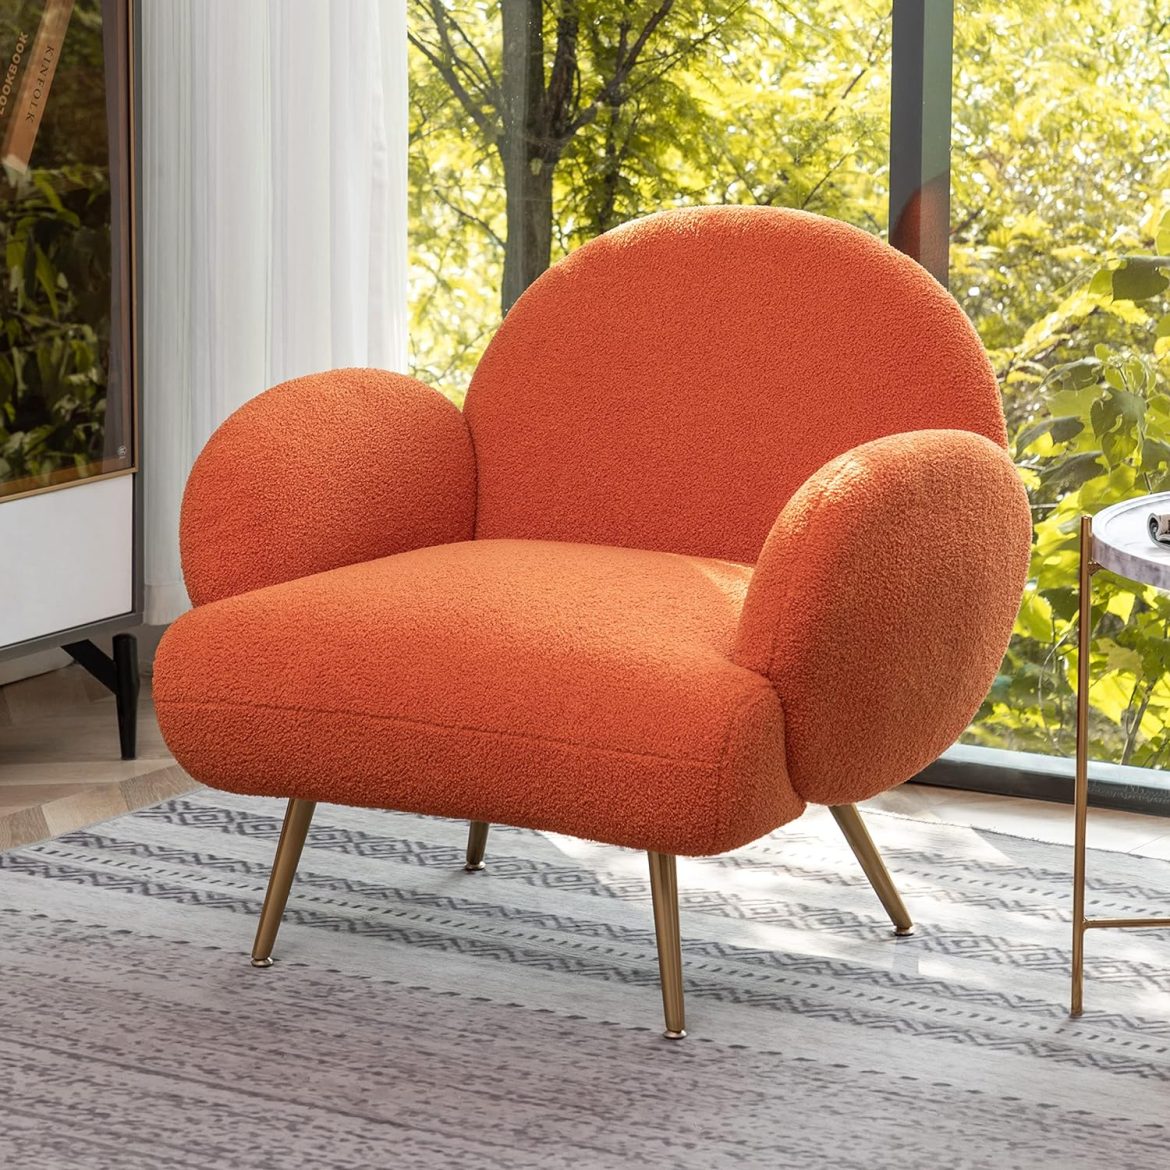 Top 15 Burnt Orange Accent Chairs: Amazon’s Best-Sellers